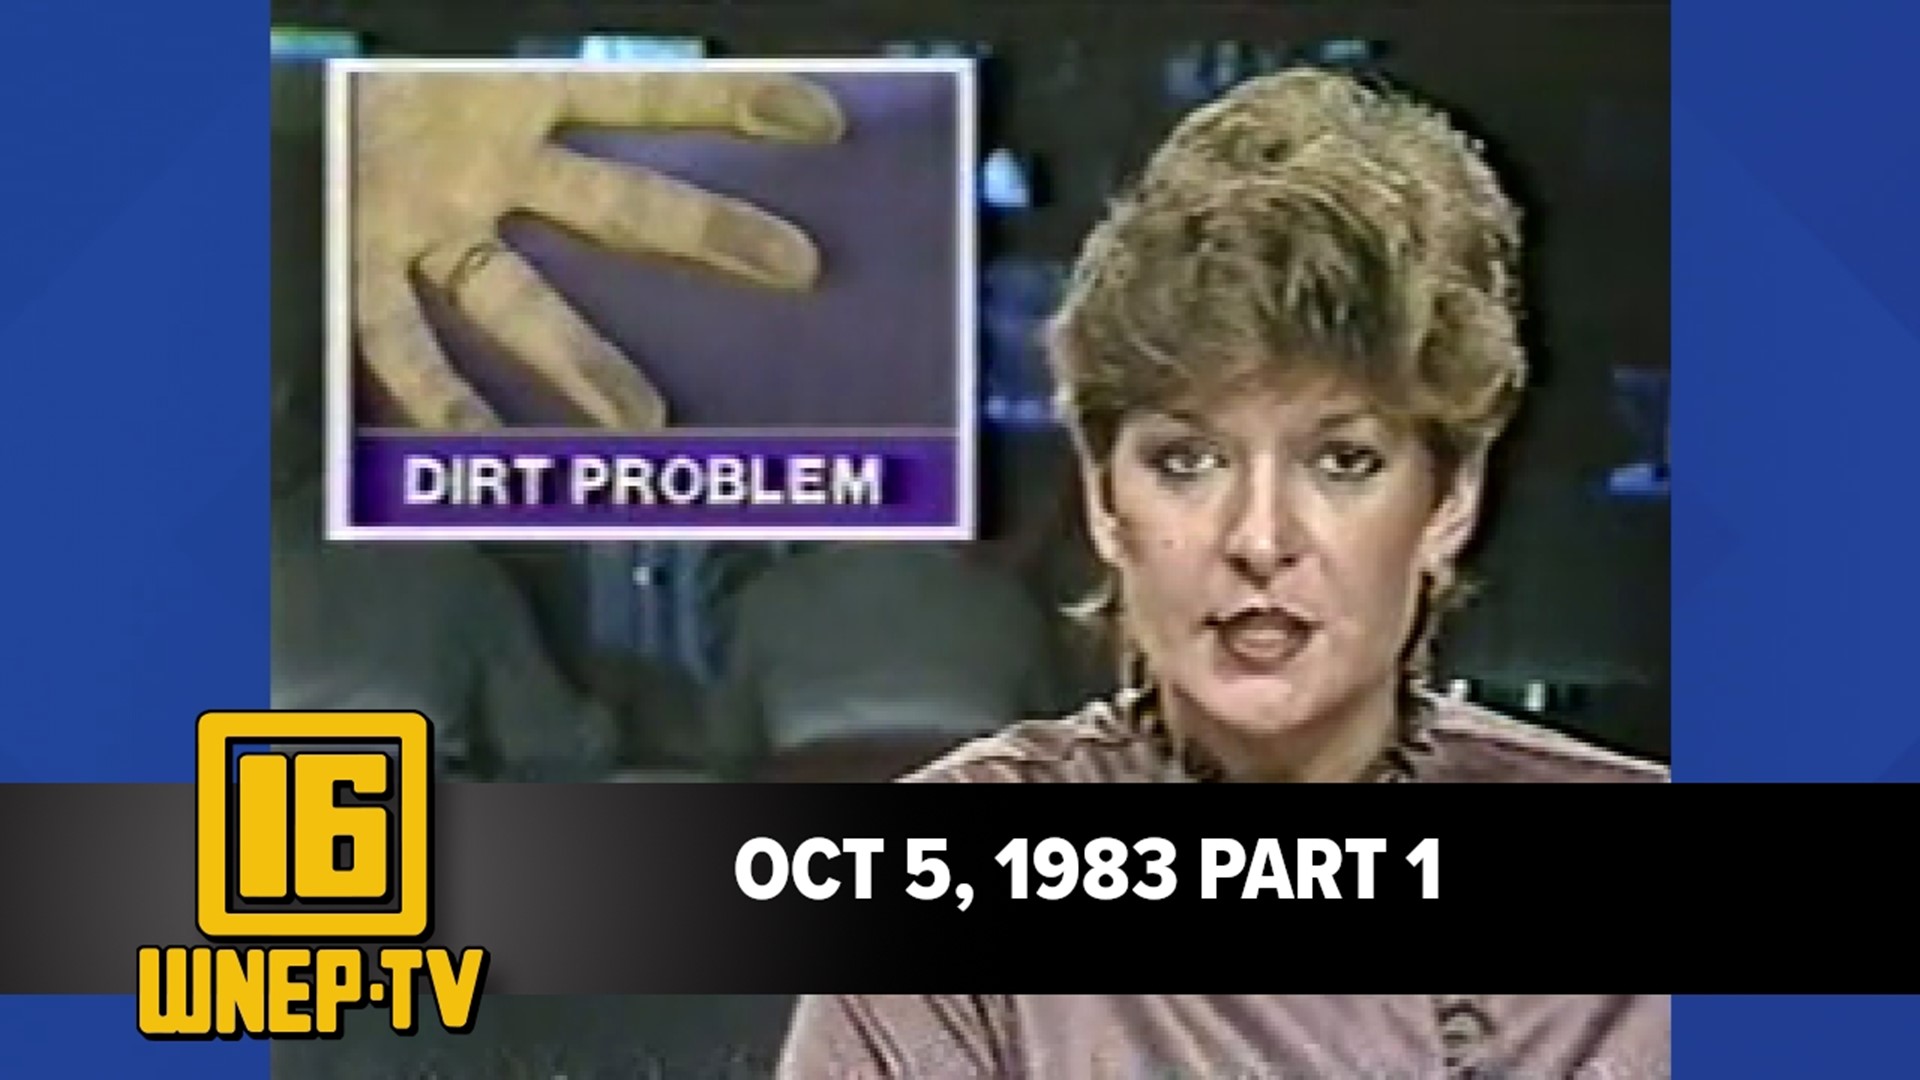 Join Karen Harch and Nolan Johannes for curated stories from October 5, 1983.